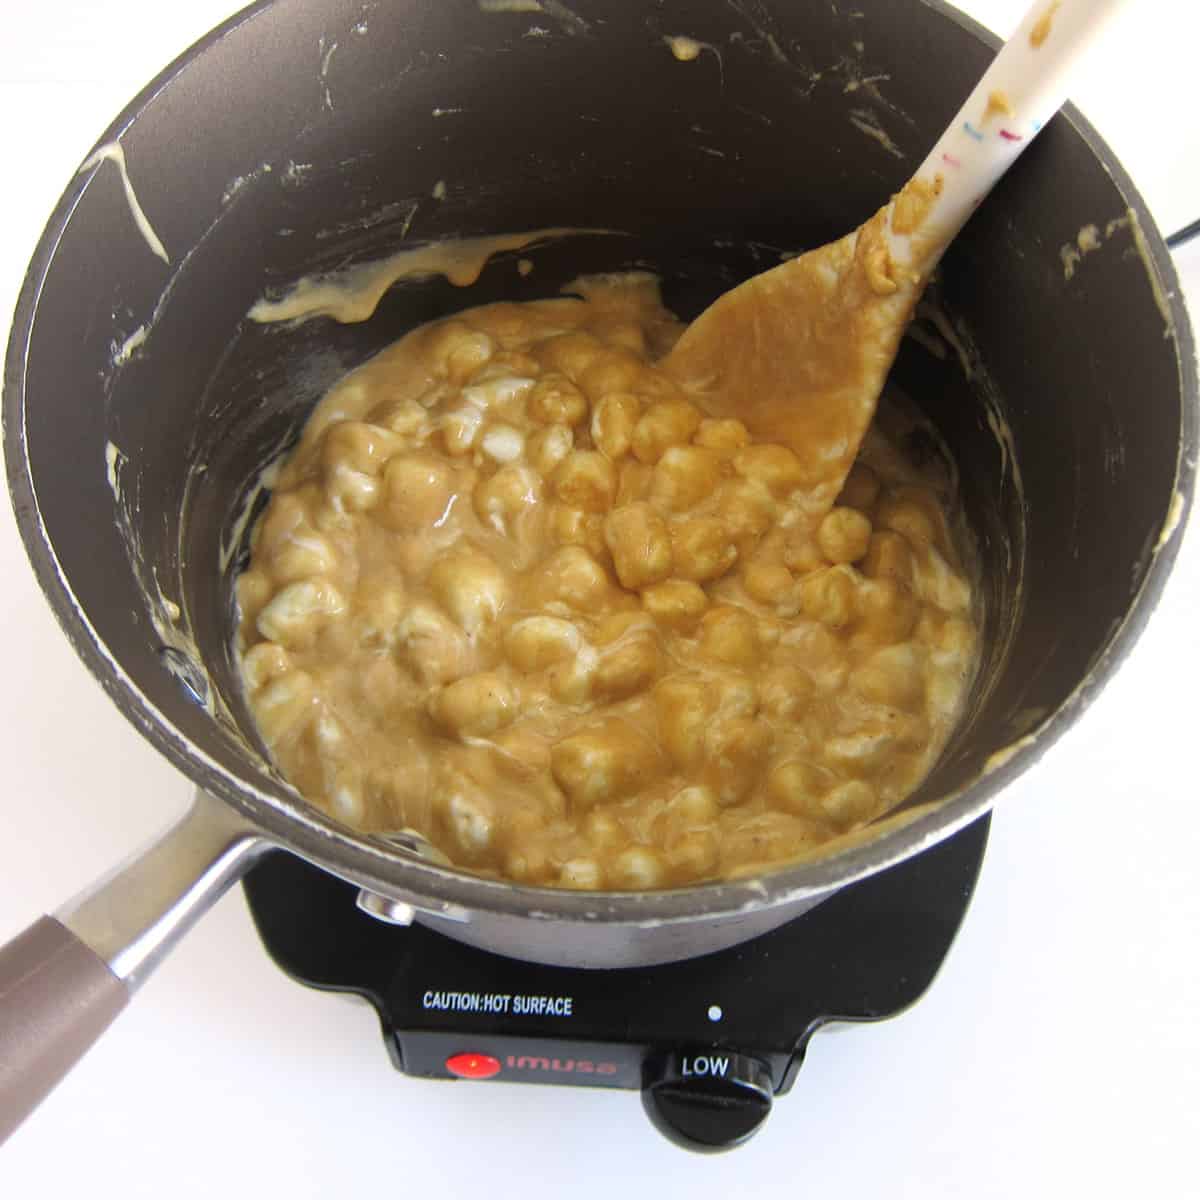 melting marshmallows, butter, and peanut butter over low heat in a saucepan